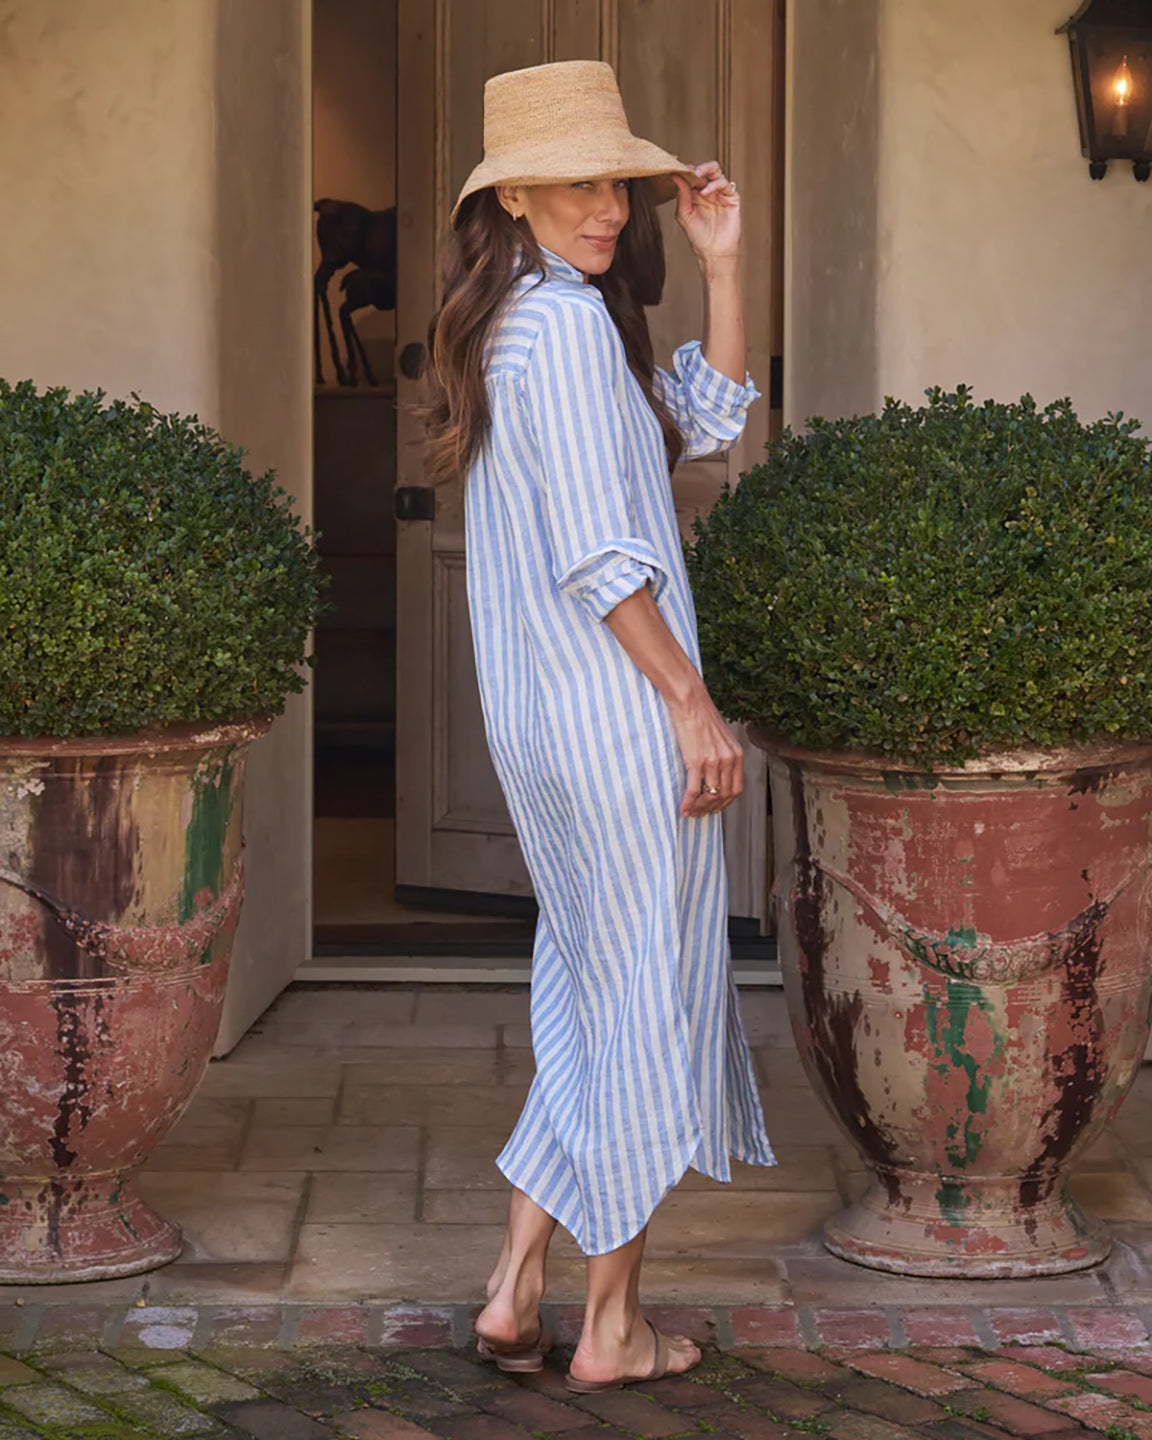 Frank and Eileen Rory Maxi Shirtdress in Wide White Blue Stripe